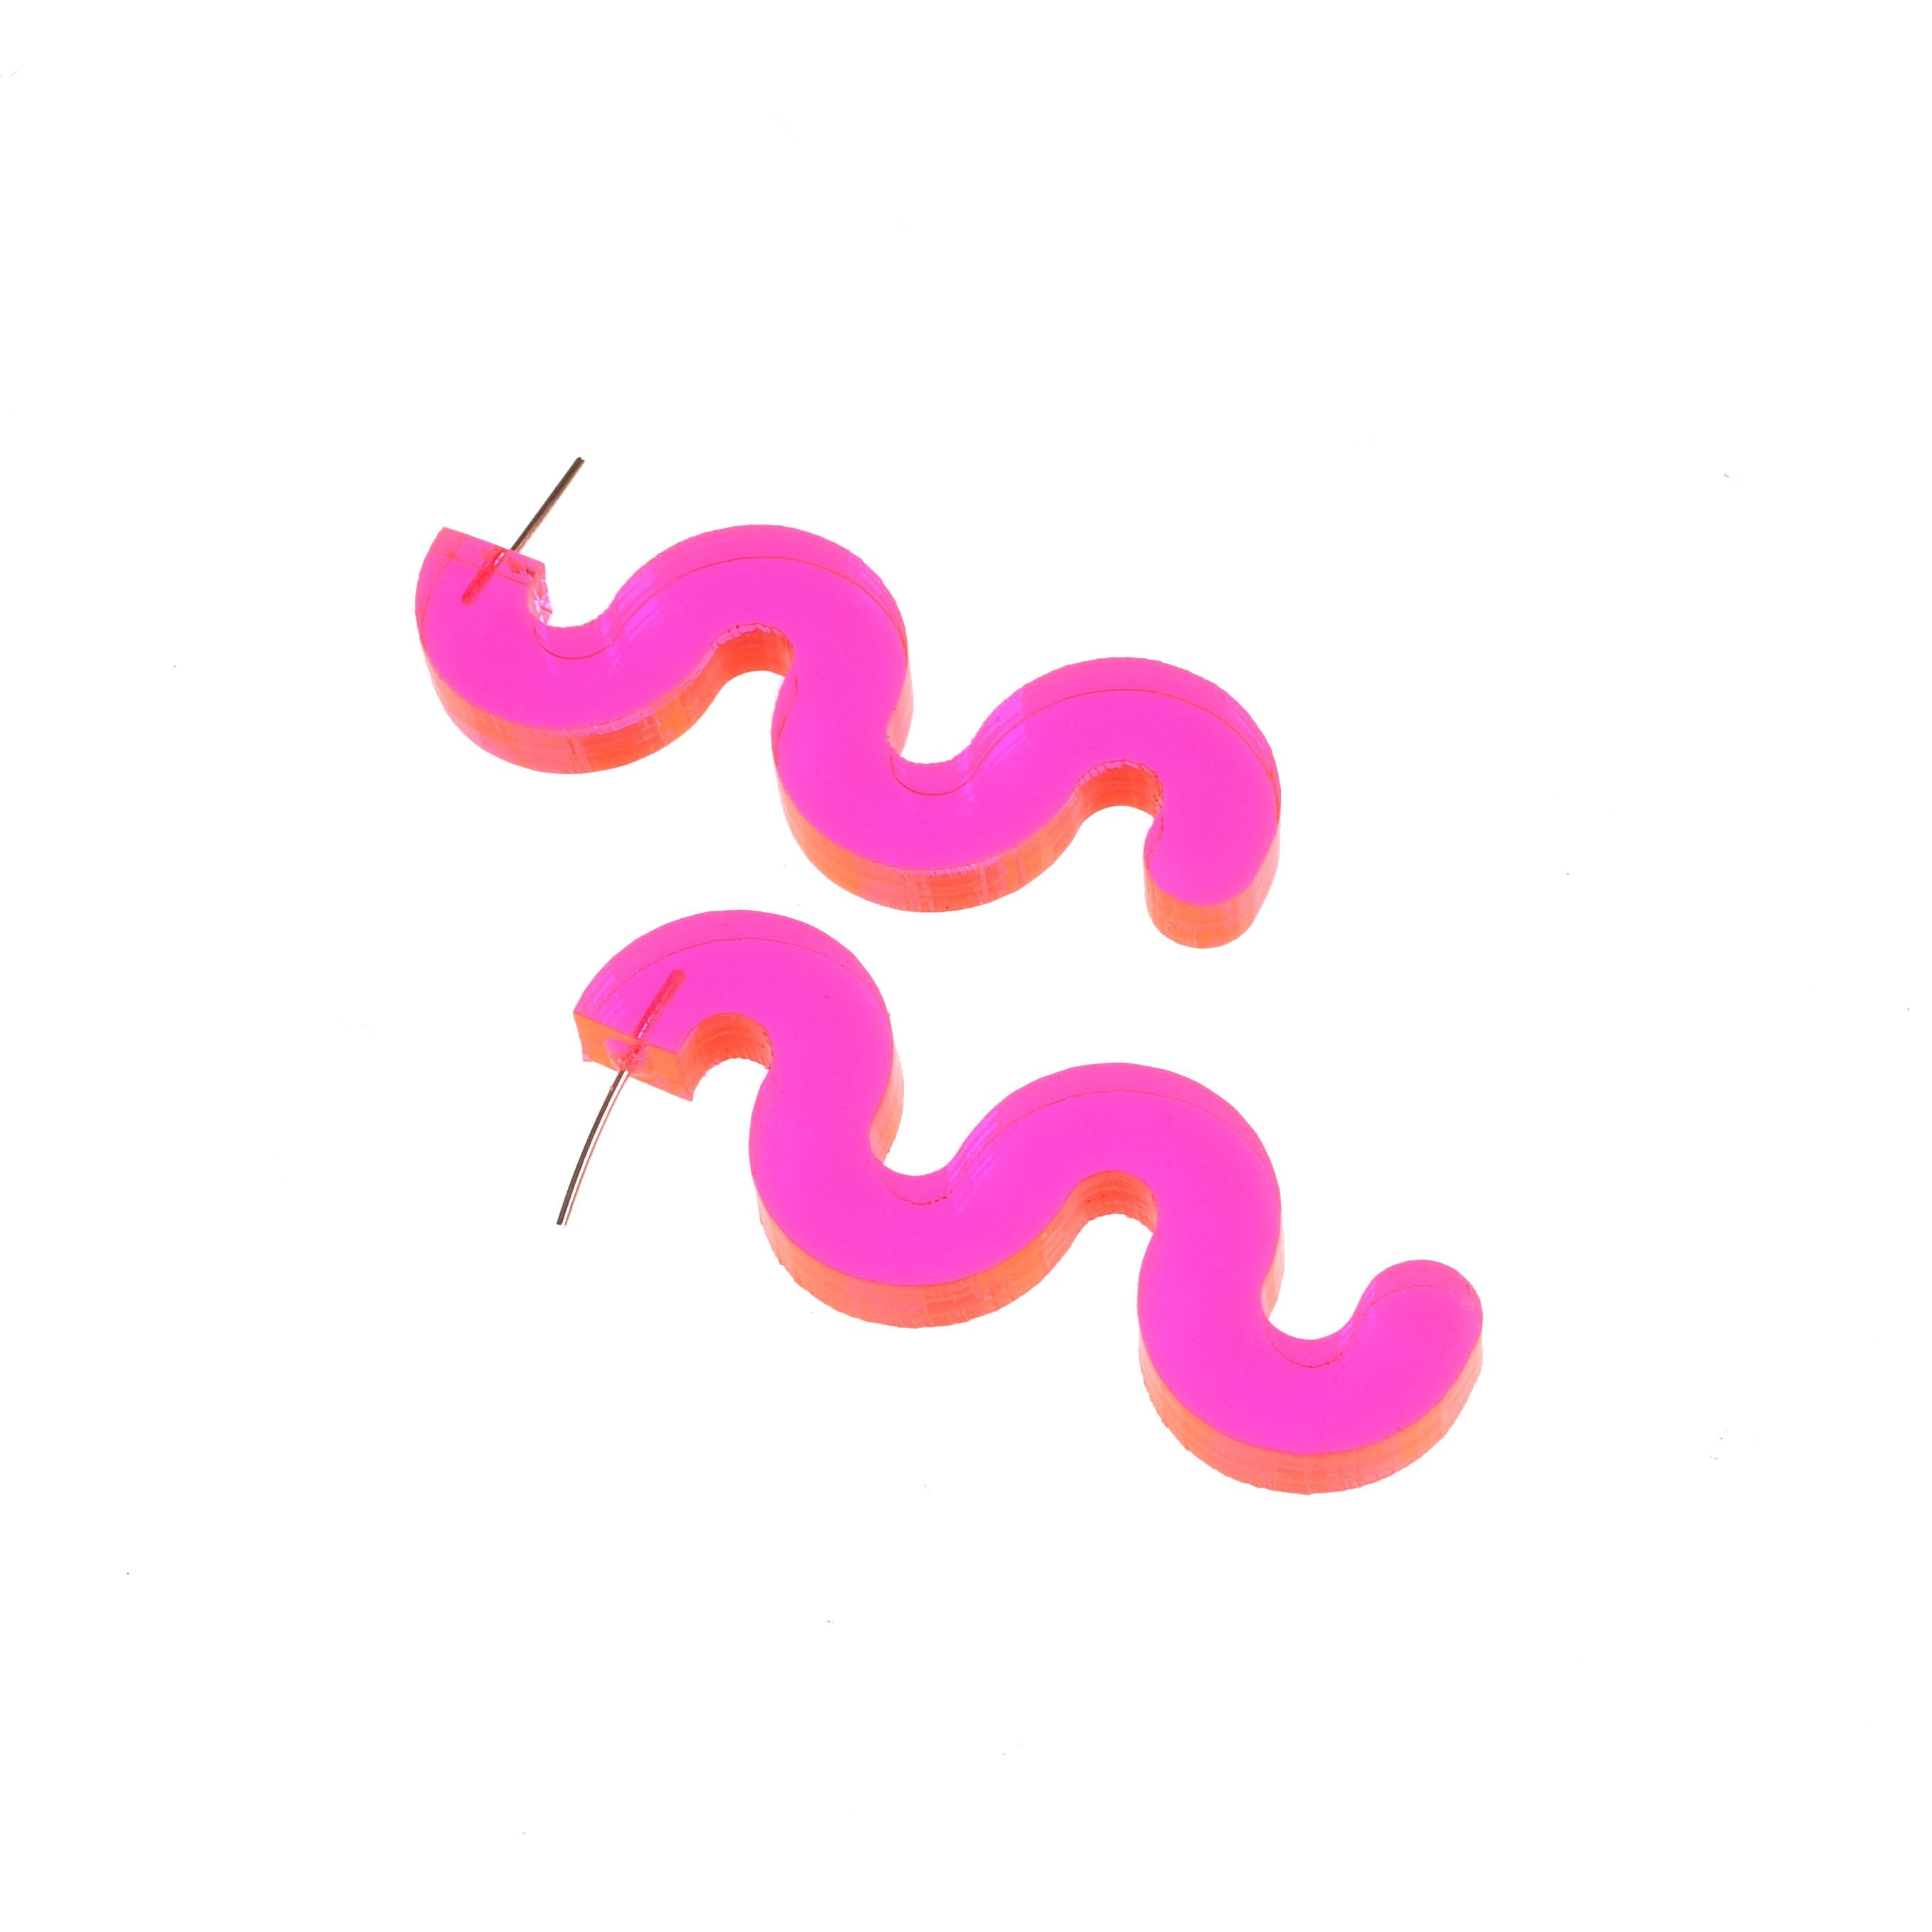 Squiggle Earrings - Transparent neon pink